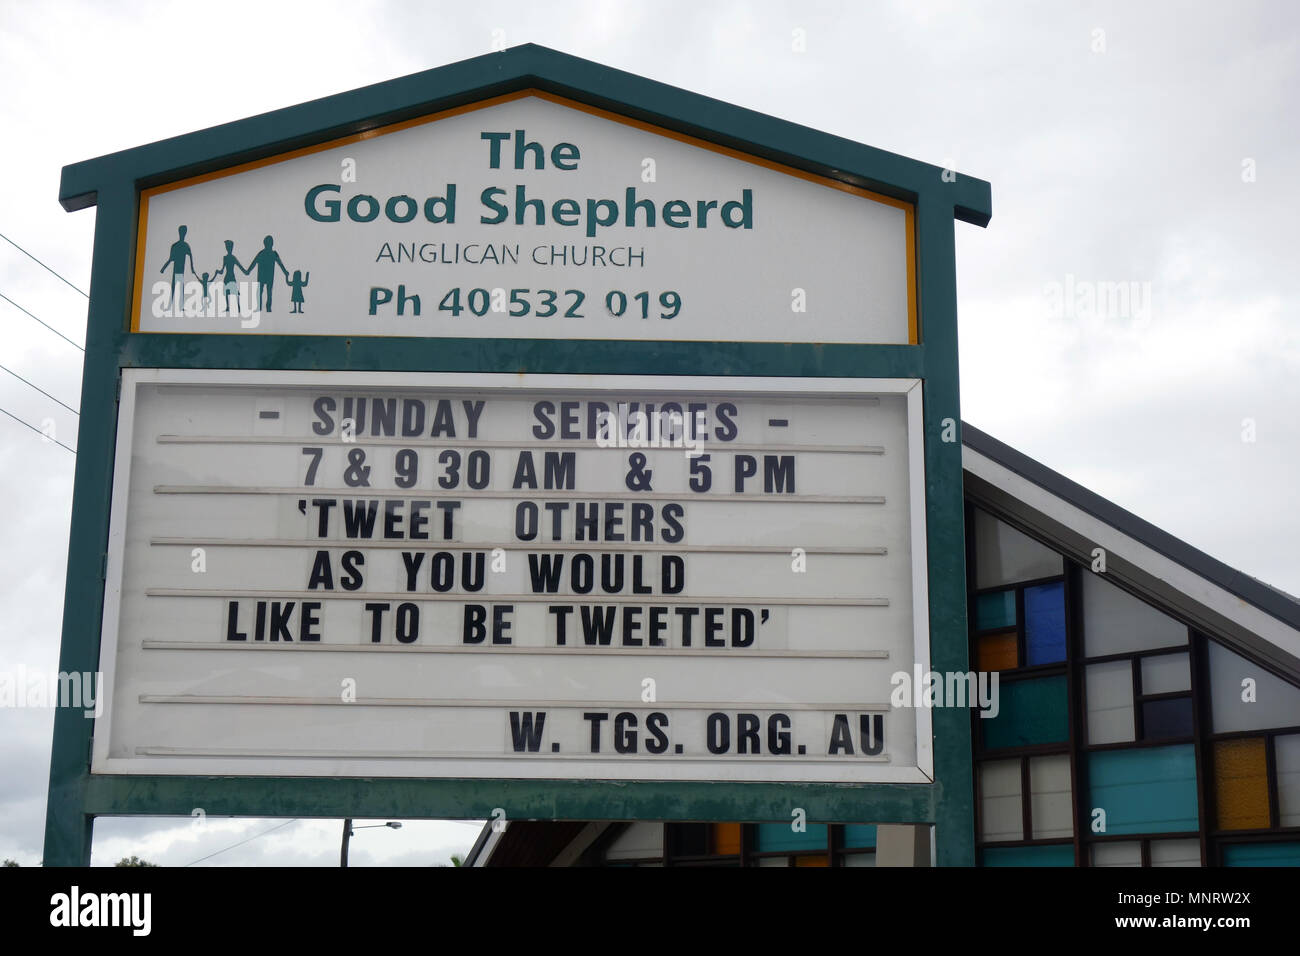 “Tweet others as you would like to be tweeted” letterboard sign outside local church, Cairns, Queensland, Australia. No PR Stock Photo